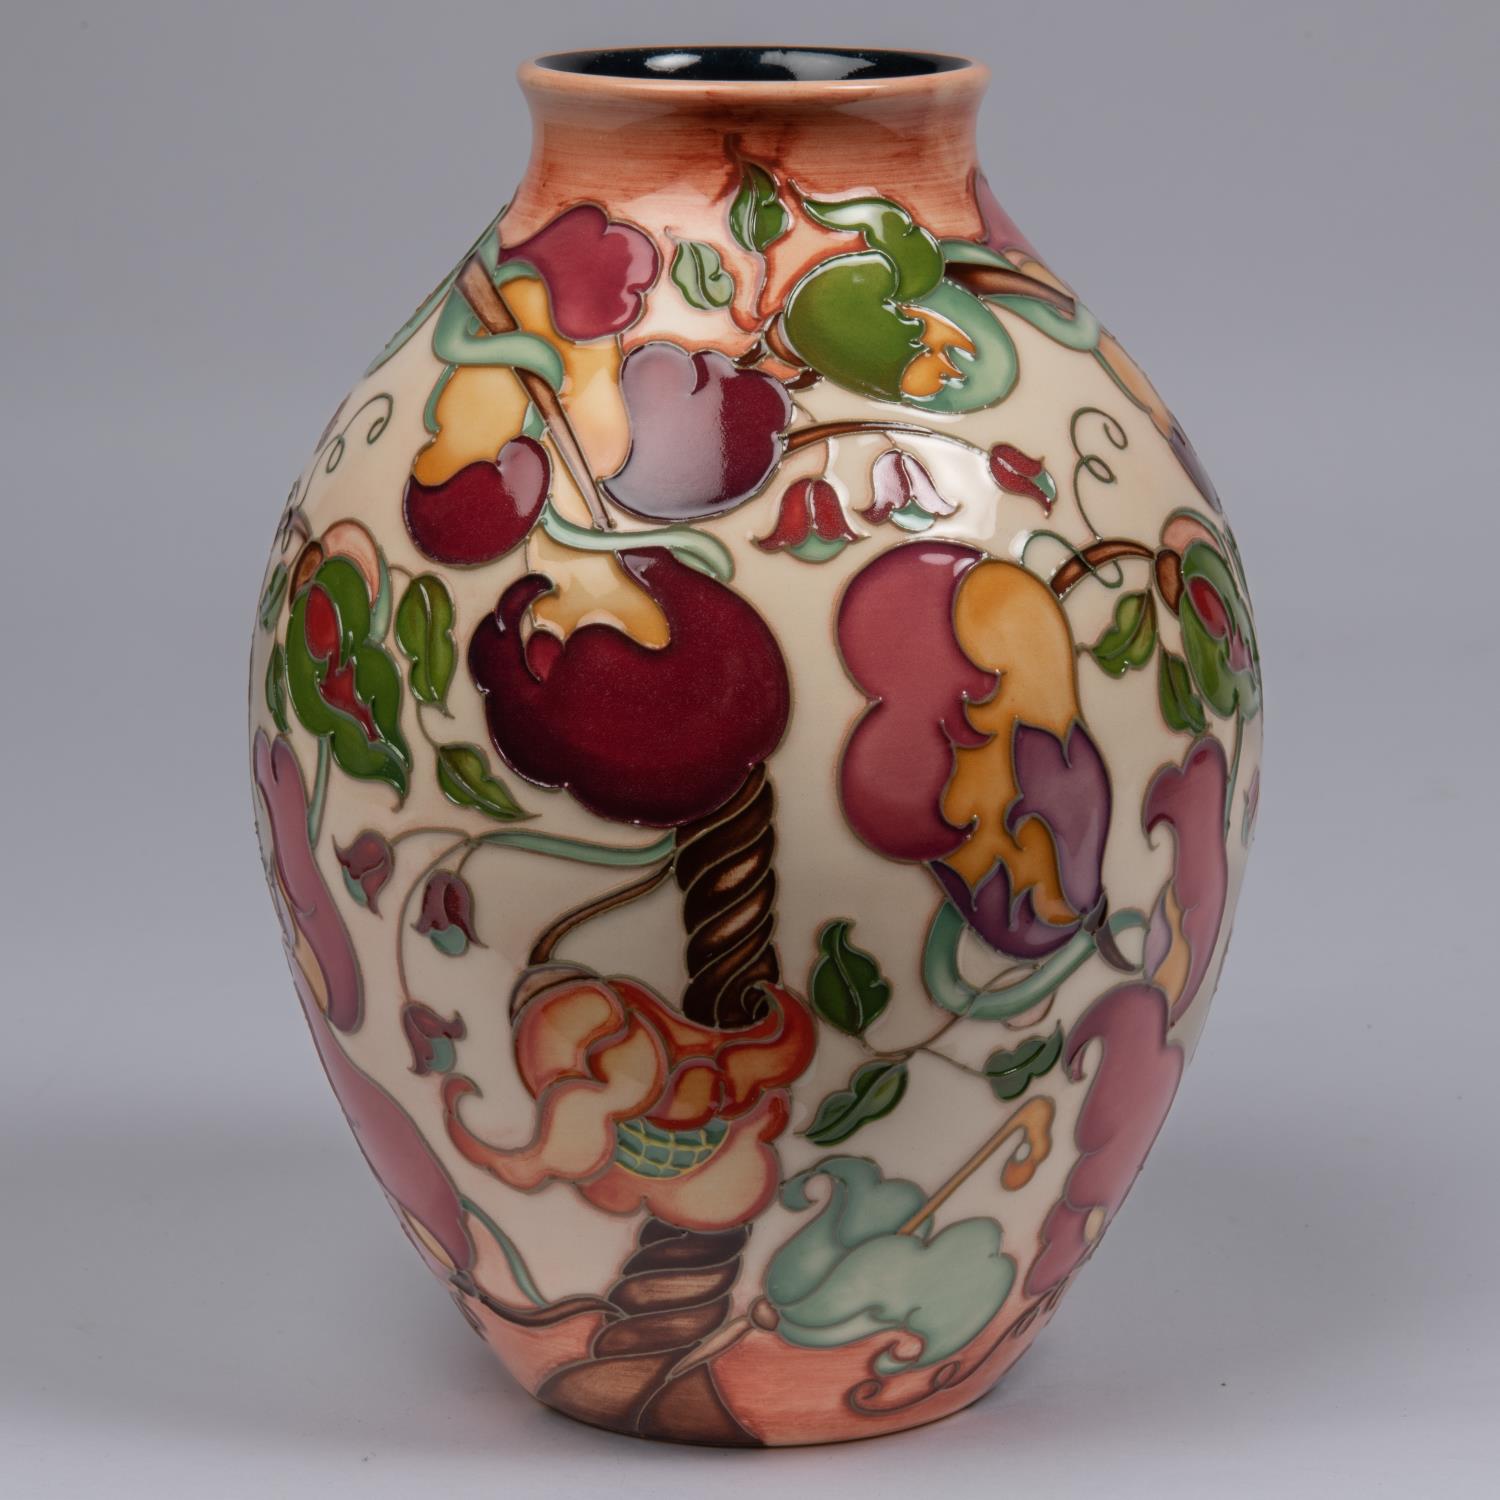 A Moorcroft pottery vase. With a stylised mixed floral design. Marks to base, pineapple date